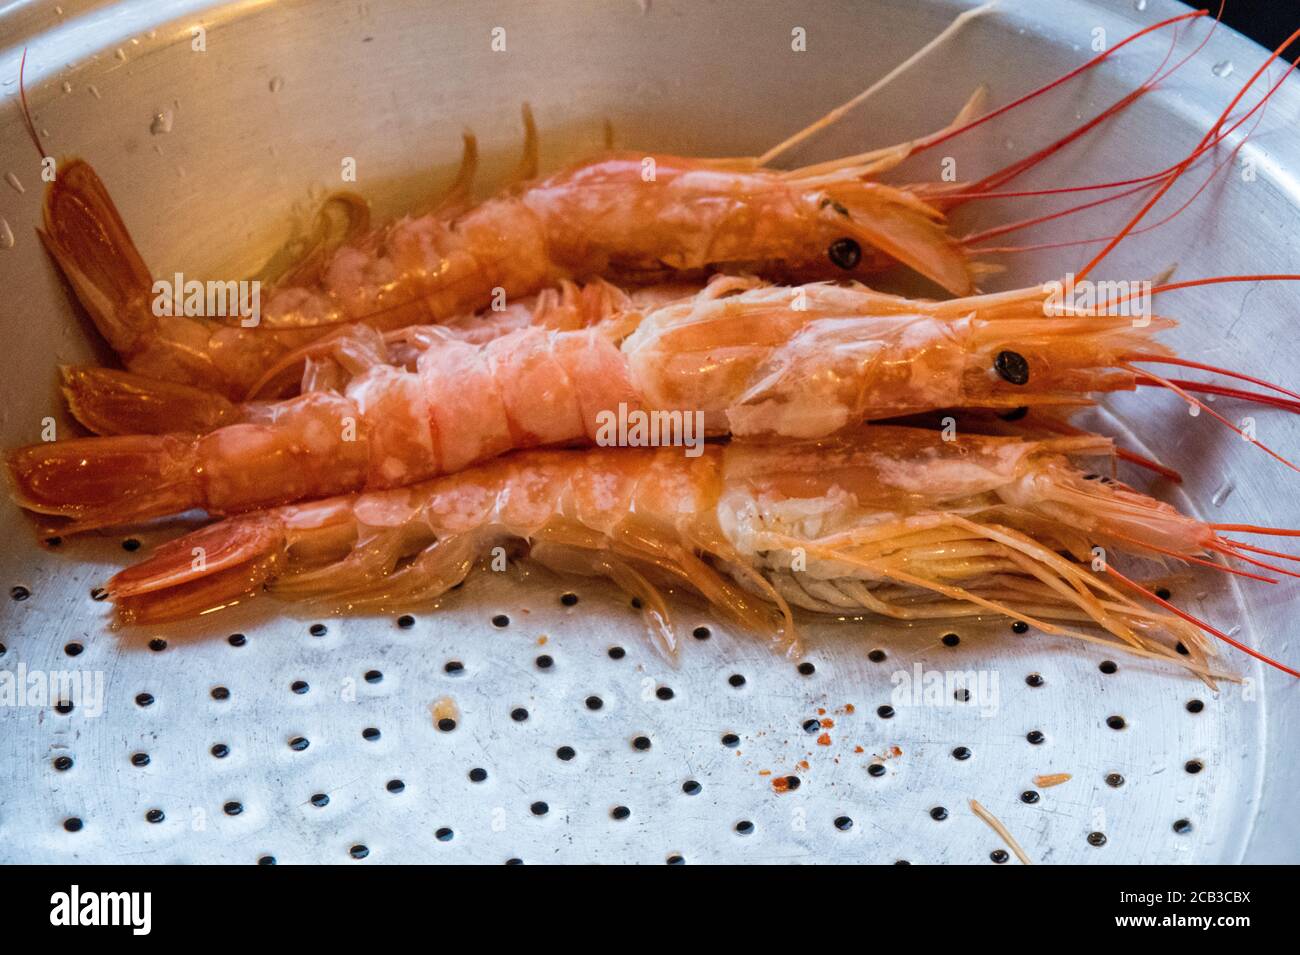 Nice sized prawns in a prep bowl ready for cooking.  Lovely color in the prep bowl with water residue. Preparation for a lovely seafood serving Stock Photo